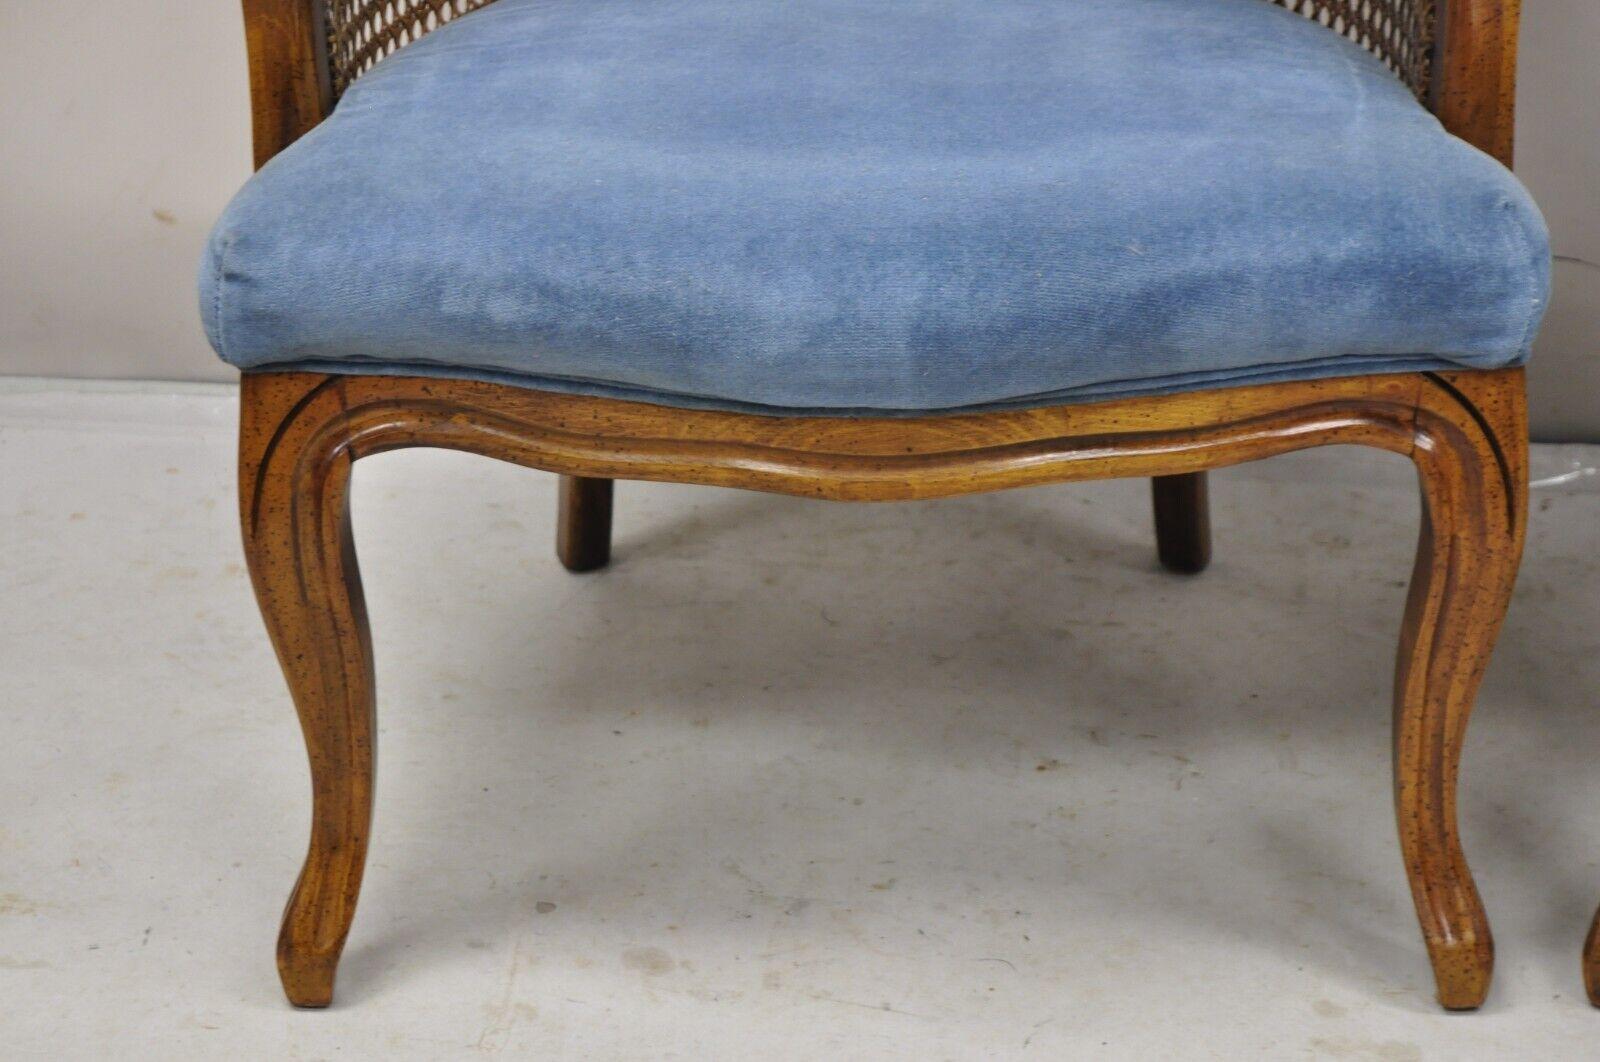 Caning Vintage Hollywood Regency Cane Barrel Back Blue Club Lounge Chairs - a Pair